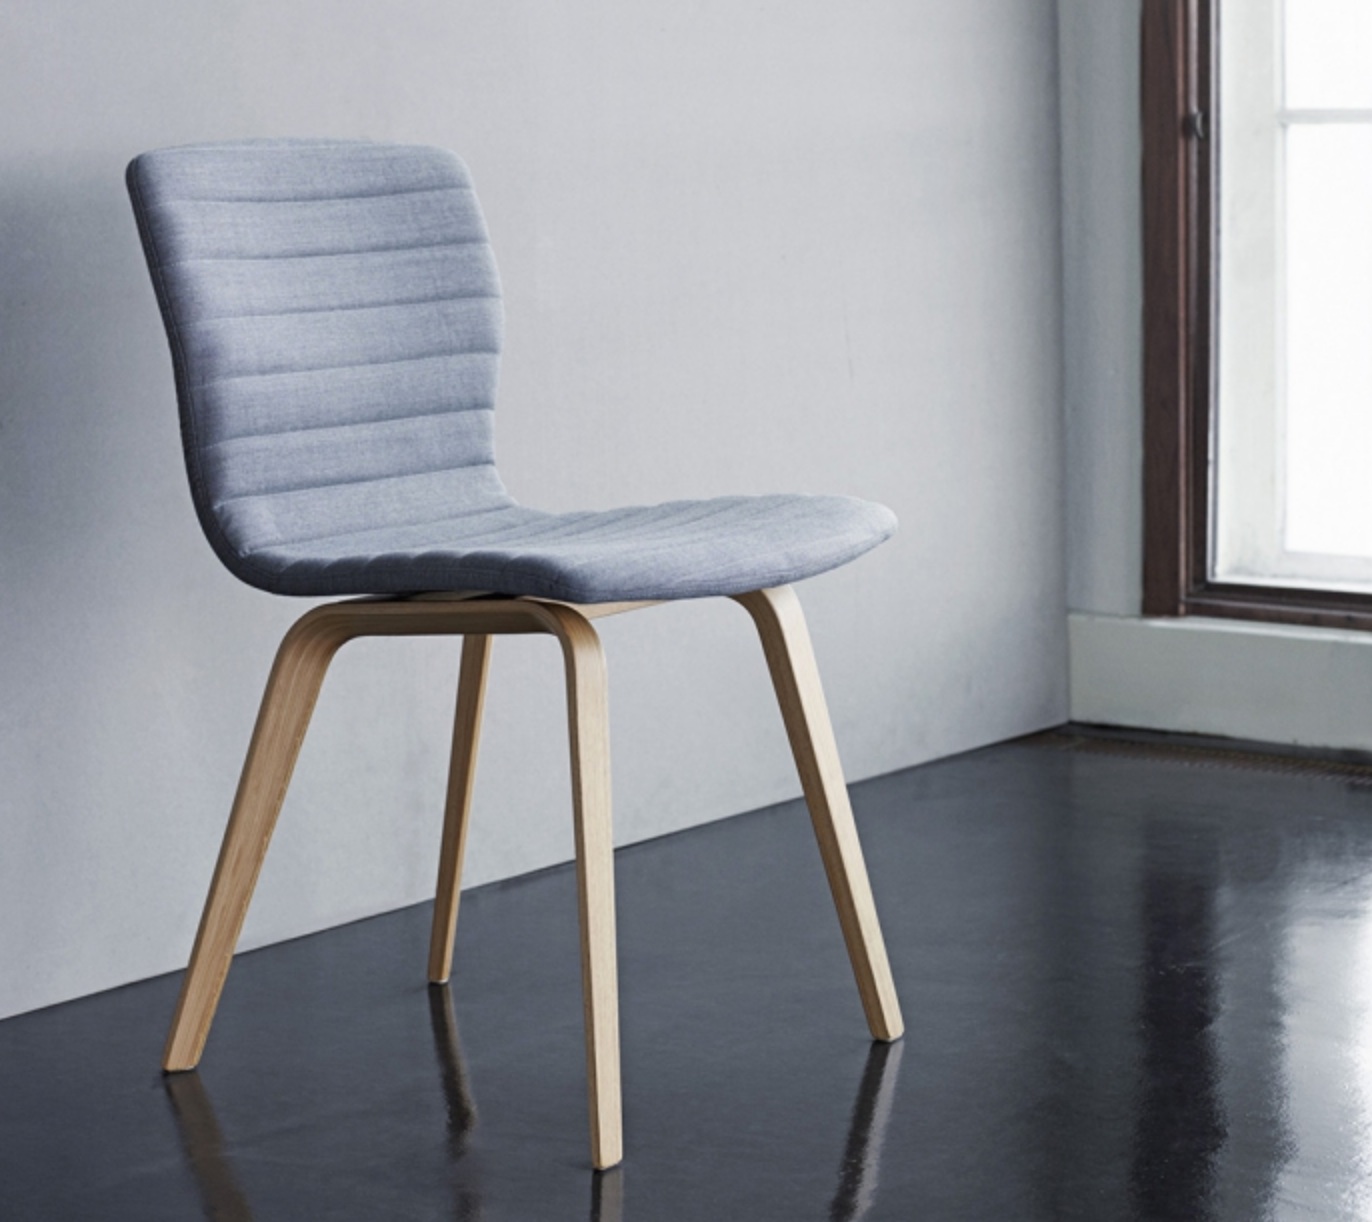 The Butterfly Pull-Up Chair for Magnus Olesen and ICF